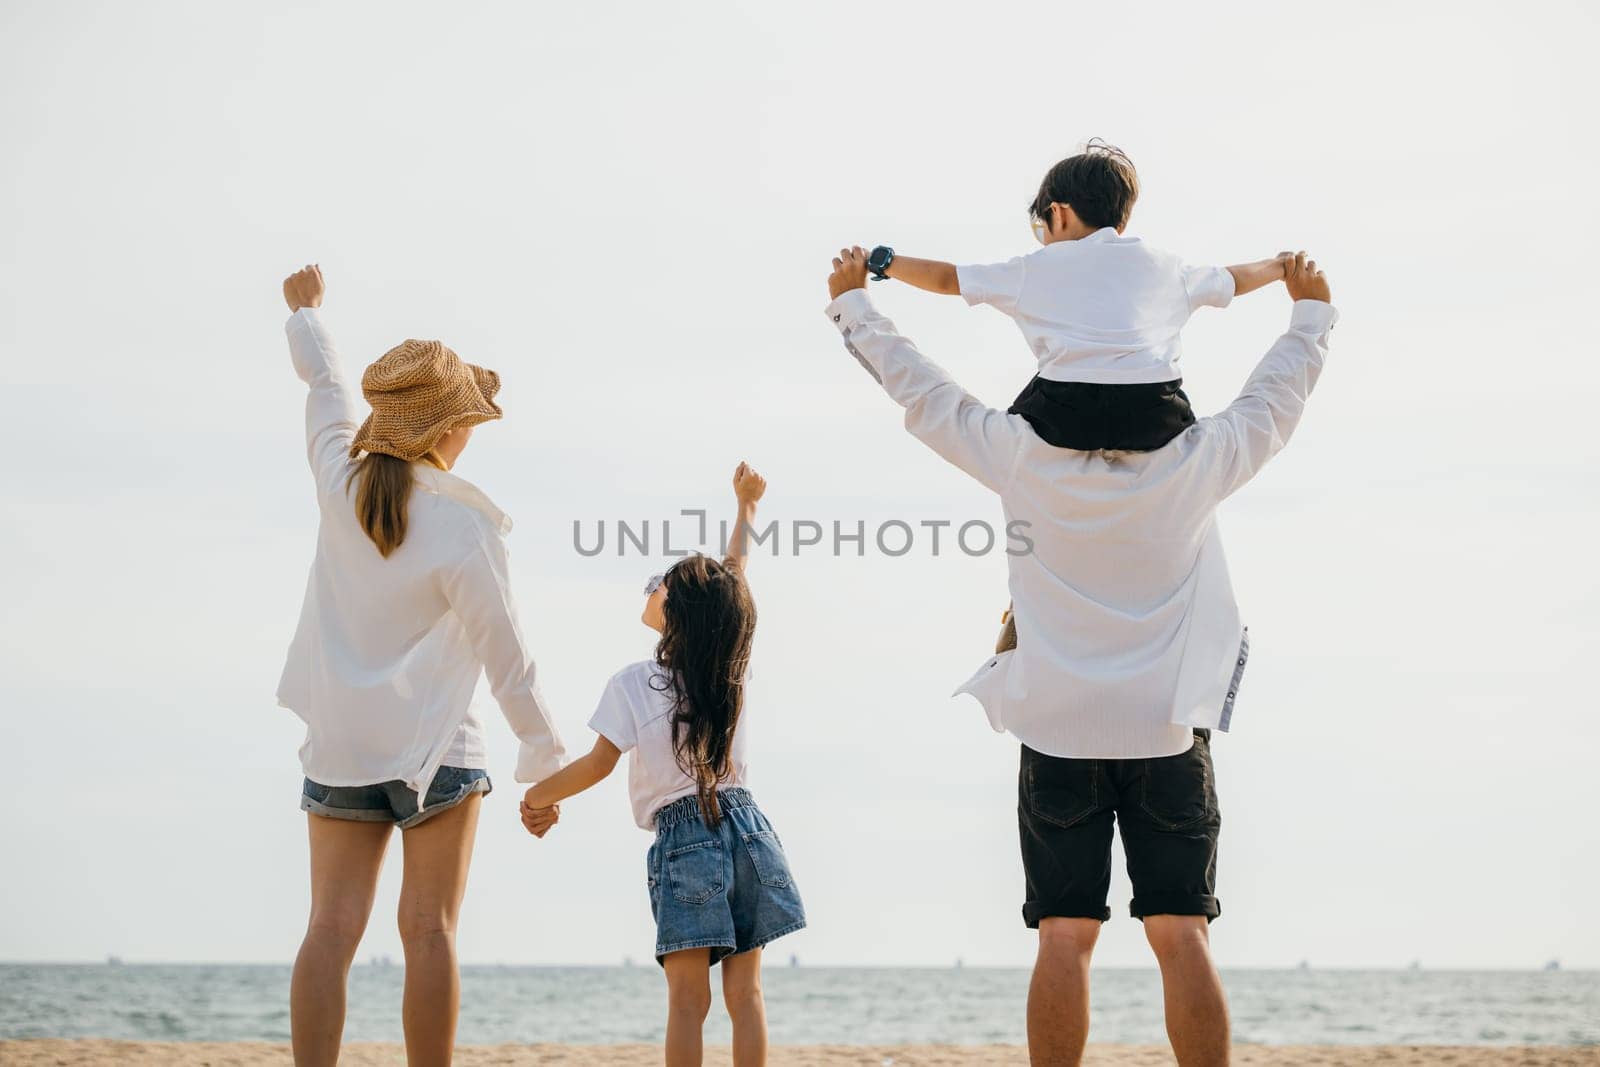 Amidst sunset glow a family of four stands joyfully on the sea beach. Father carries his son on shoulders creating heartwarming image of togetherness and carefree beach fun. Family on beach vacation